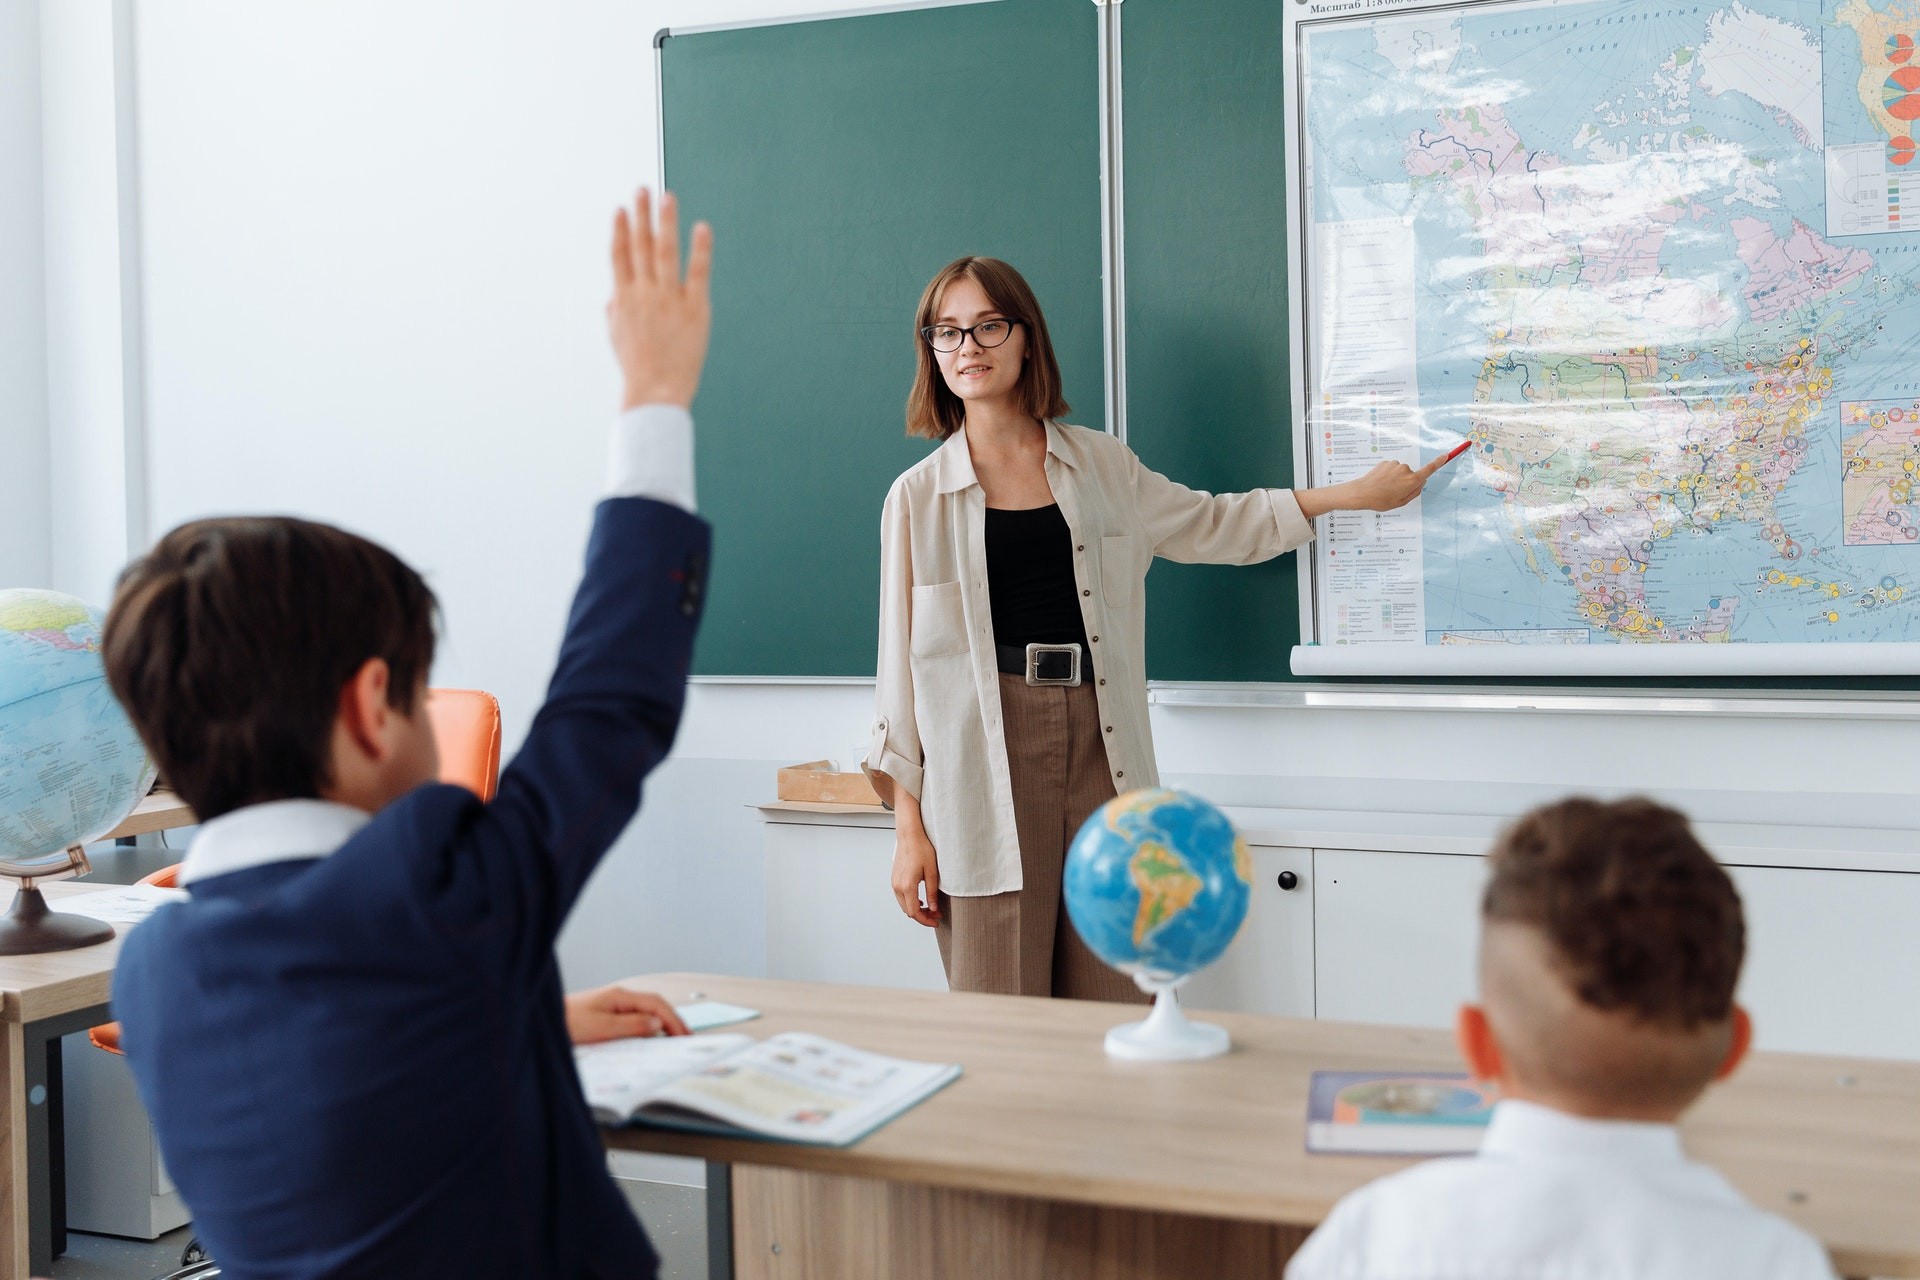 A teacher stands at the front of a classroom and points at a map in front of the chalkboard.